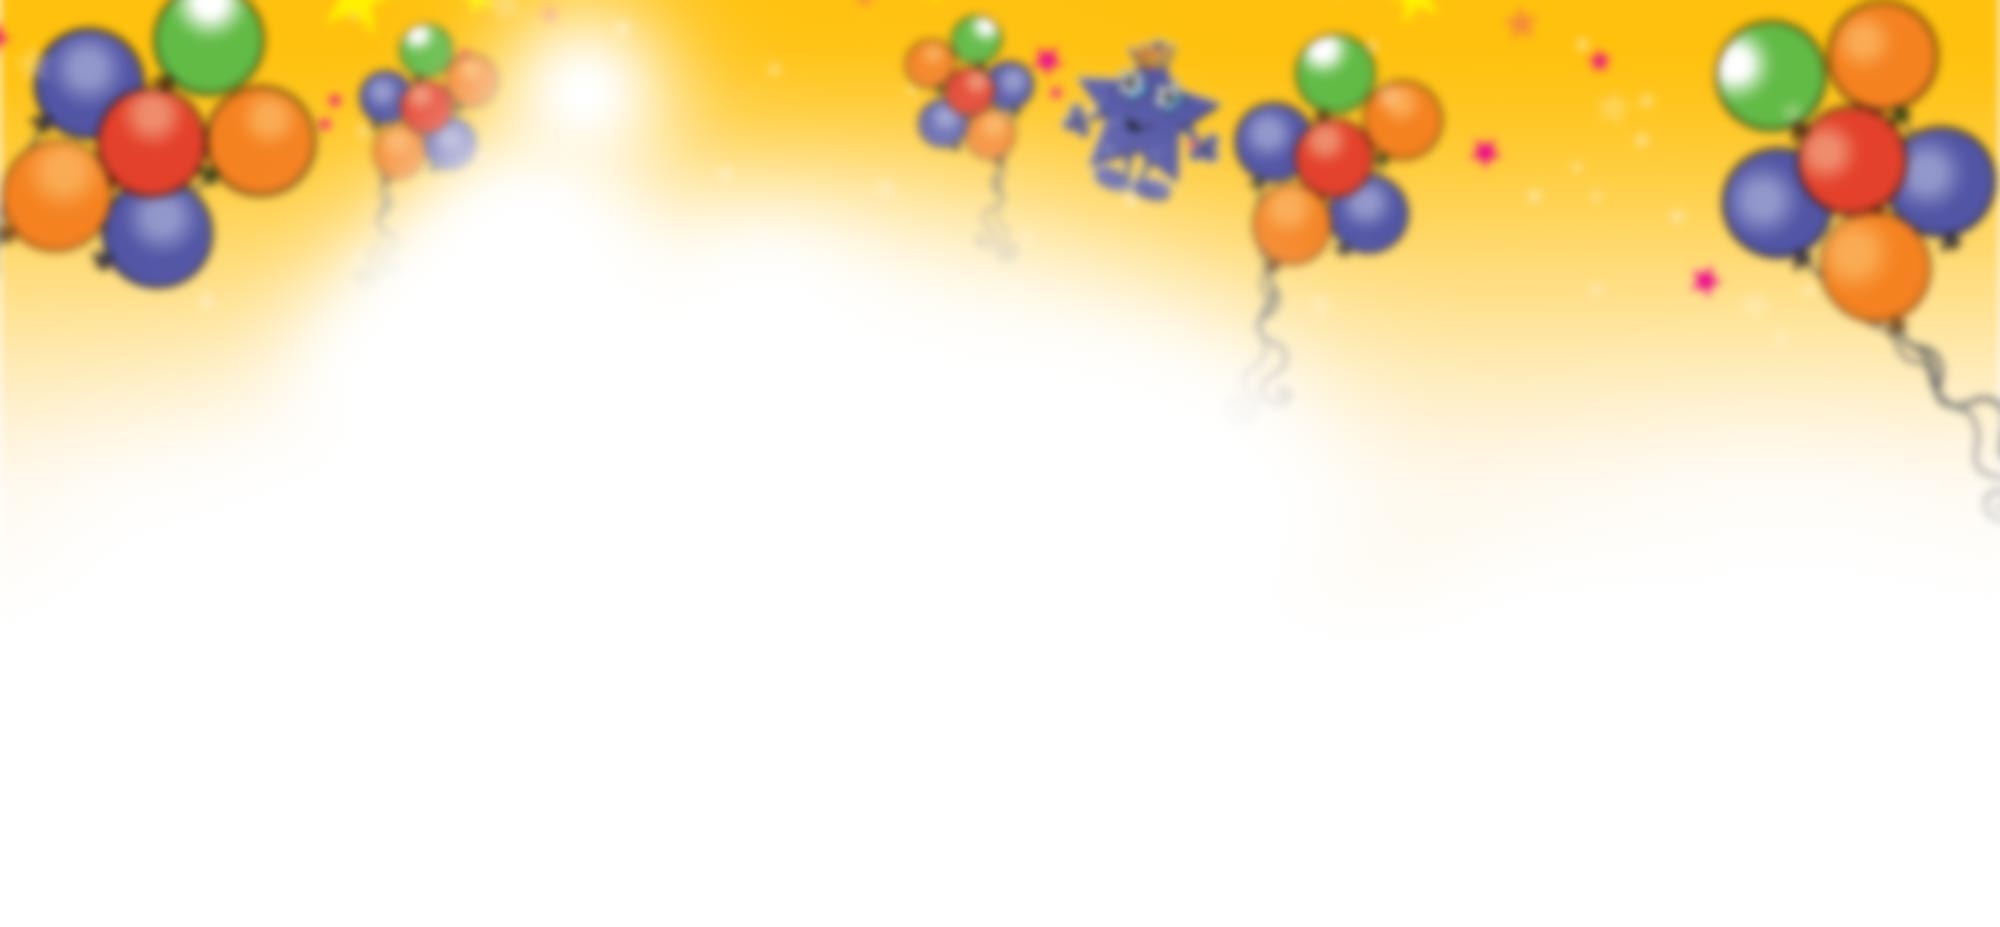 birthday background for kids png 3. Background Check All